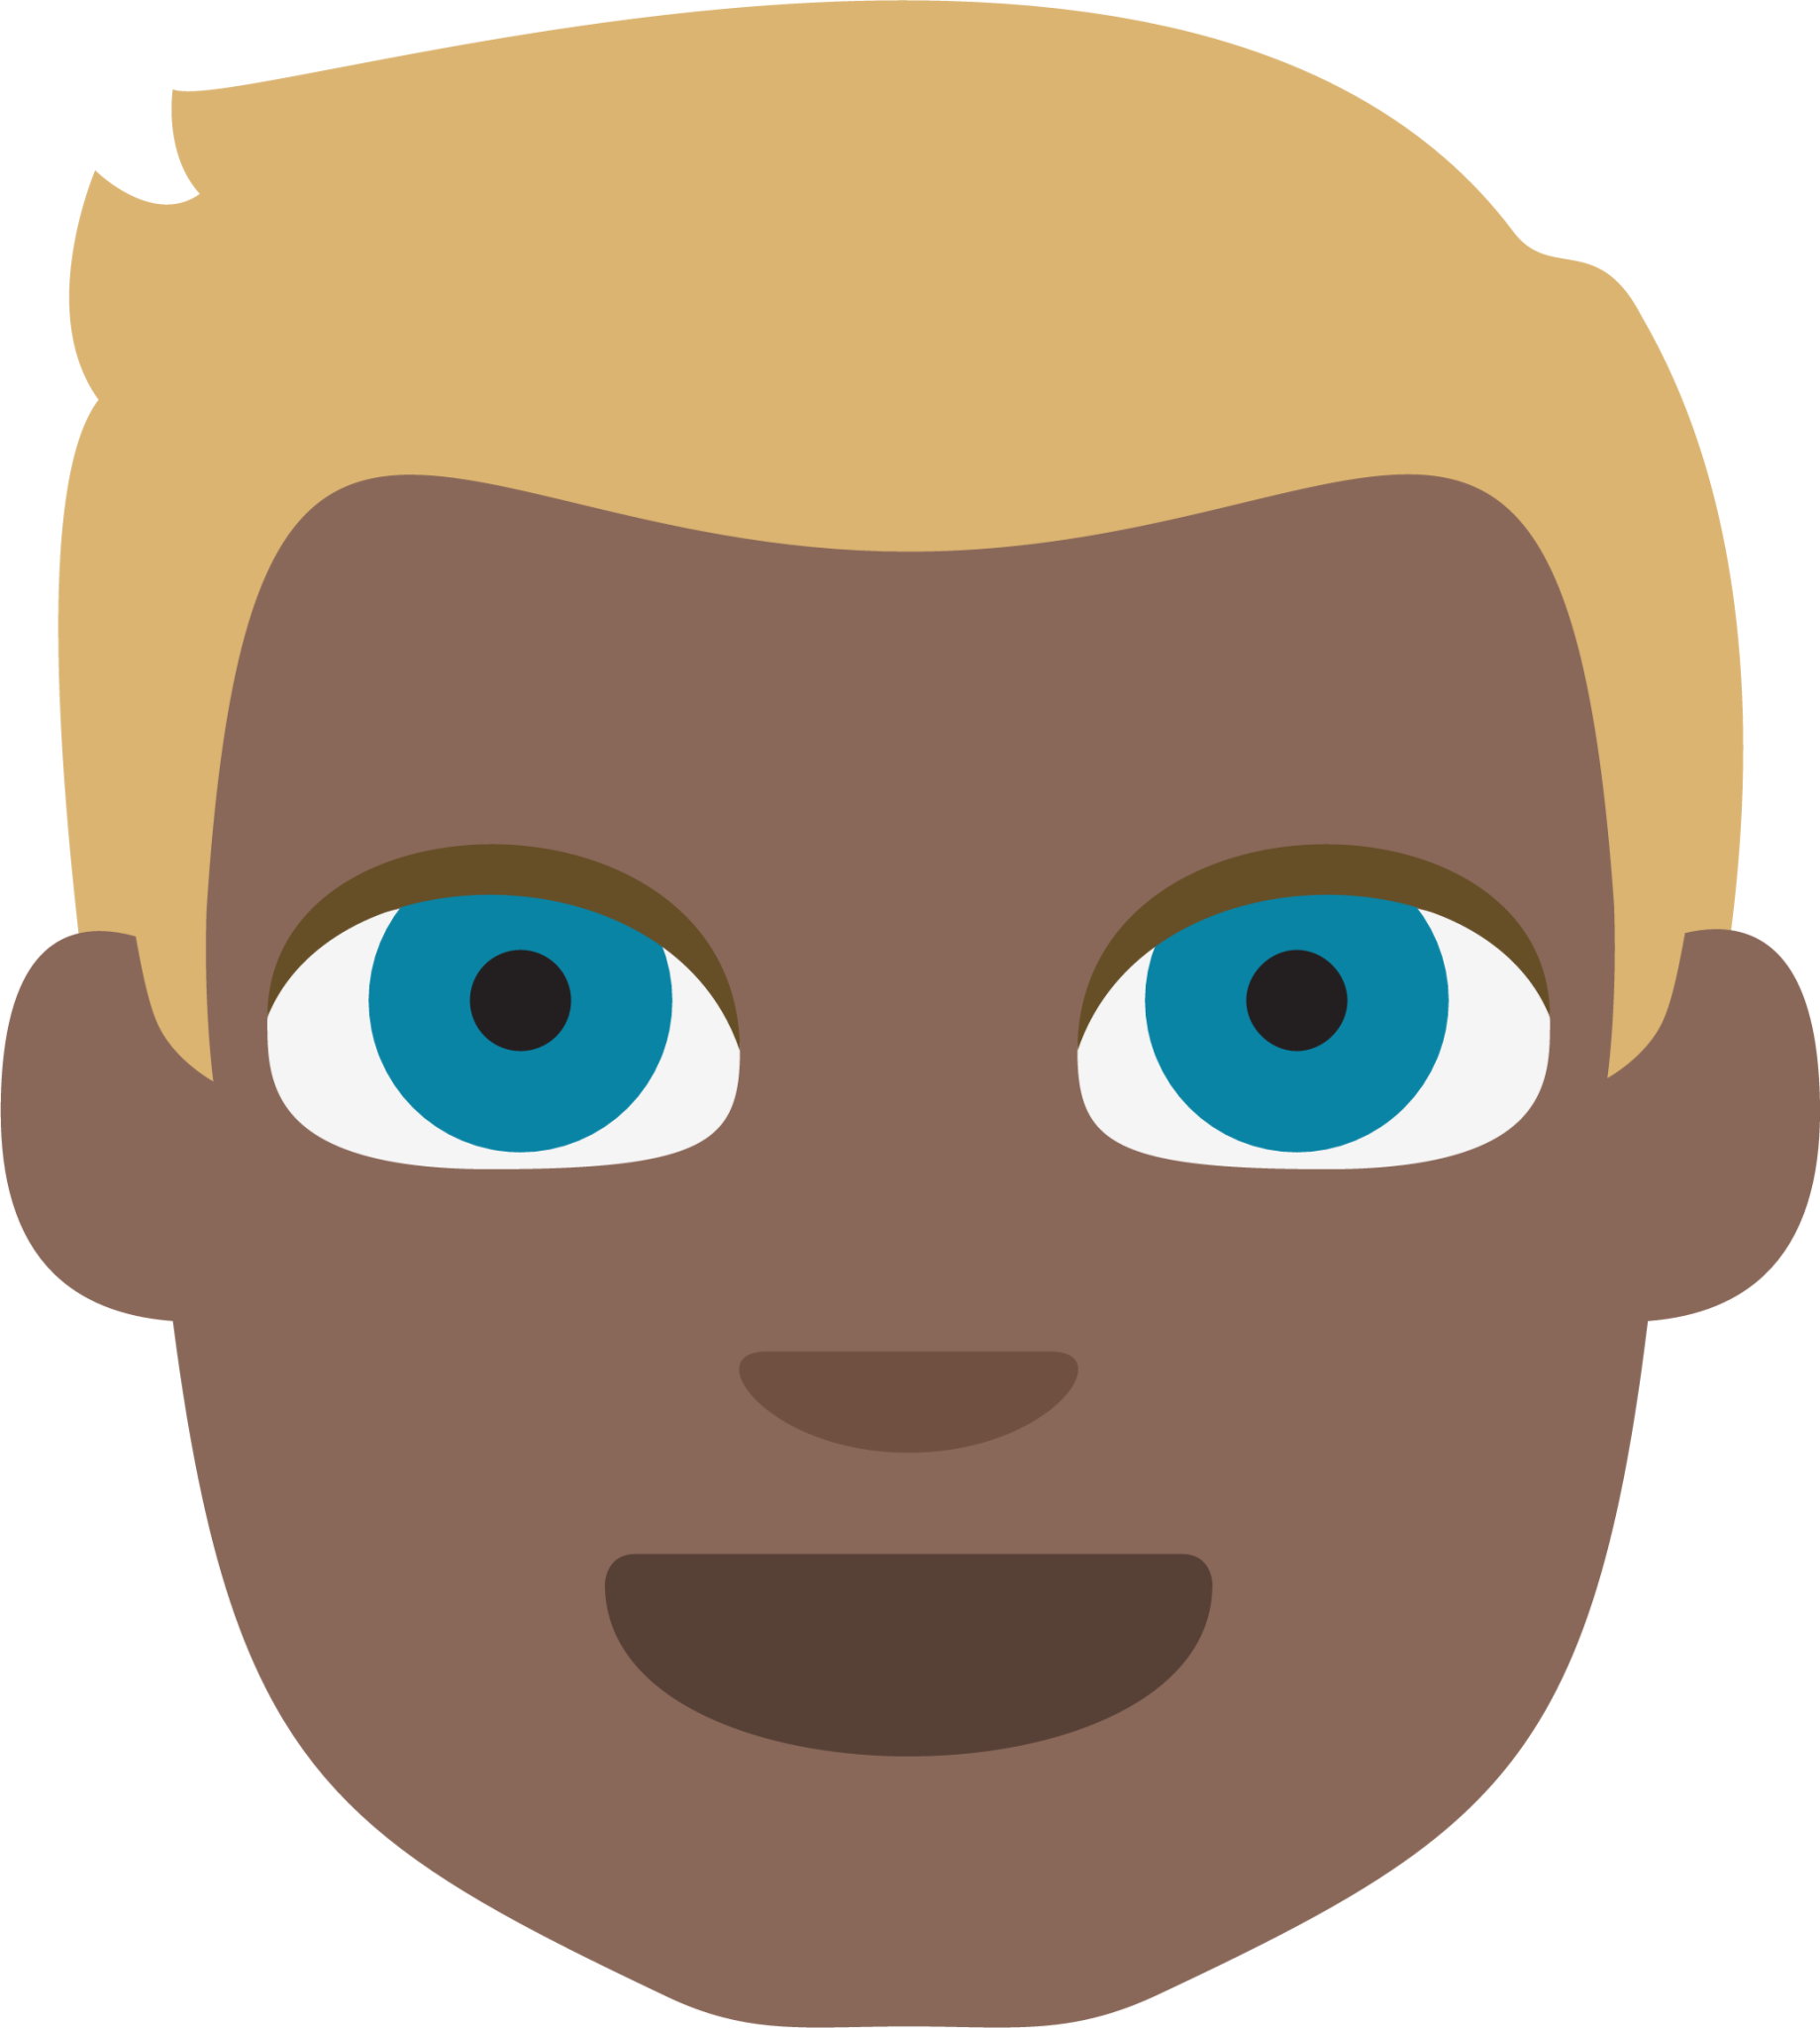 person with blond hair tone 5 emoji